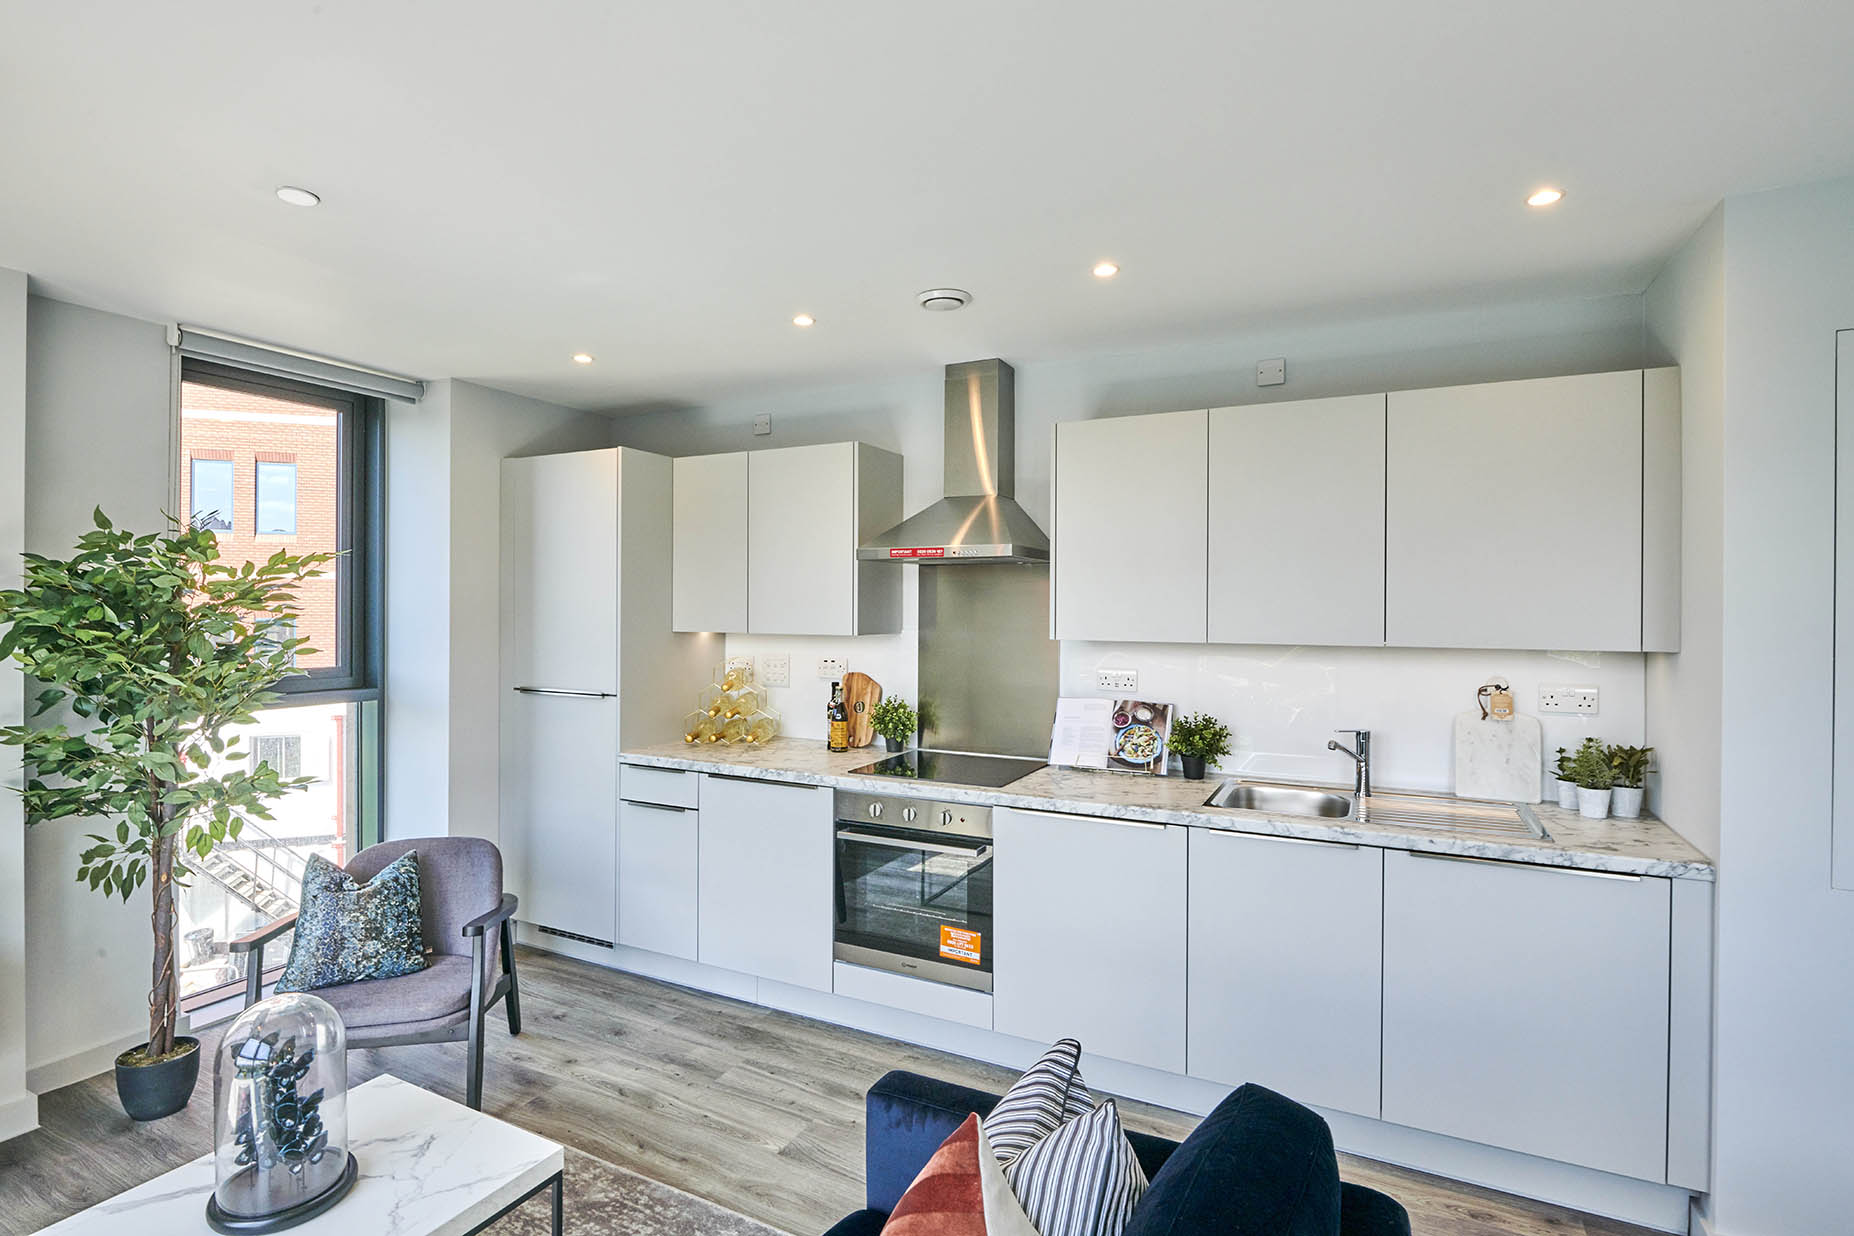 Apartments to Rent by JLL at Duet, Salford, M50, kitchen dining area